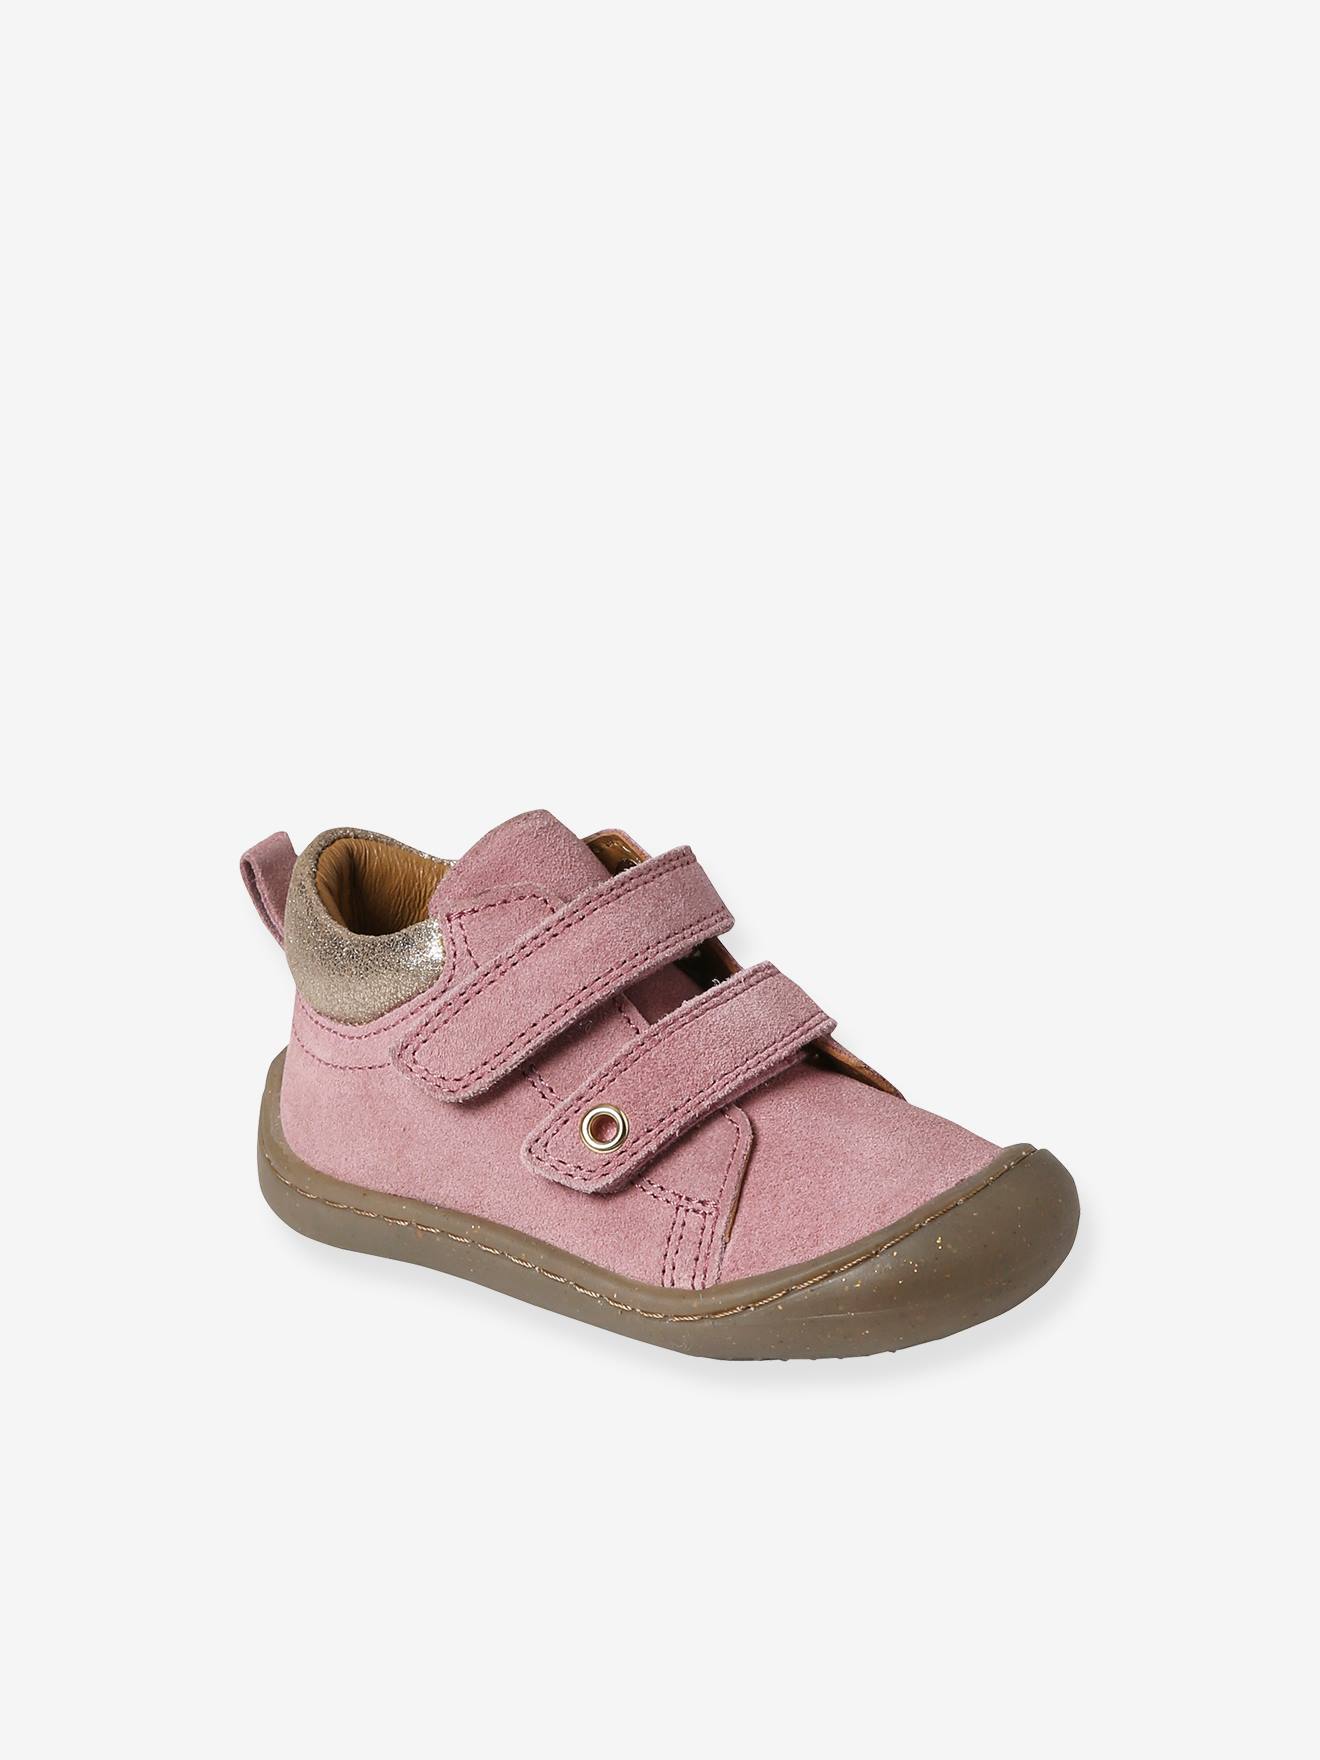 LV Trainer rose red is really great! LV shoes understand girls